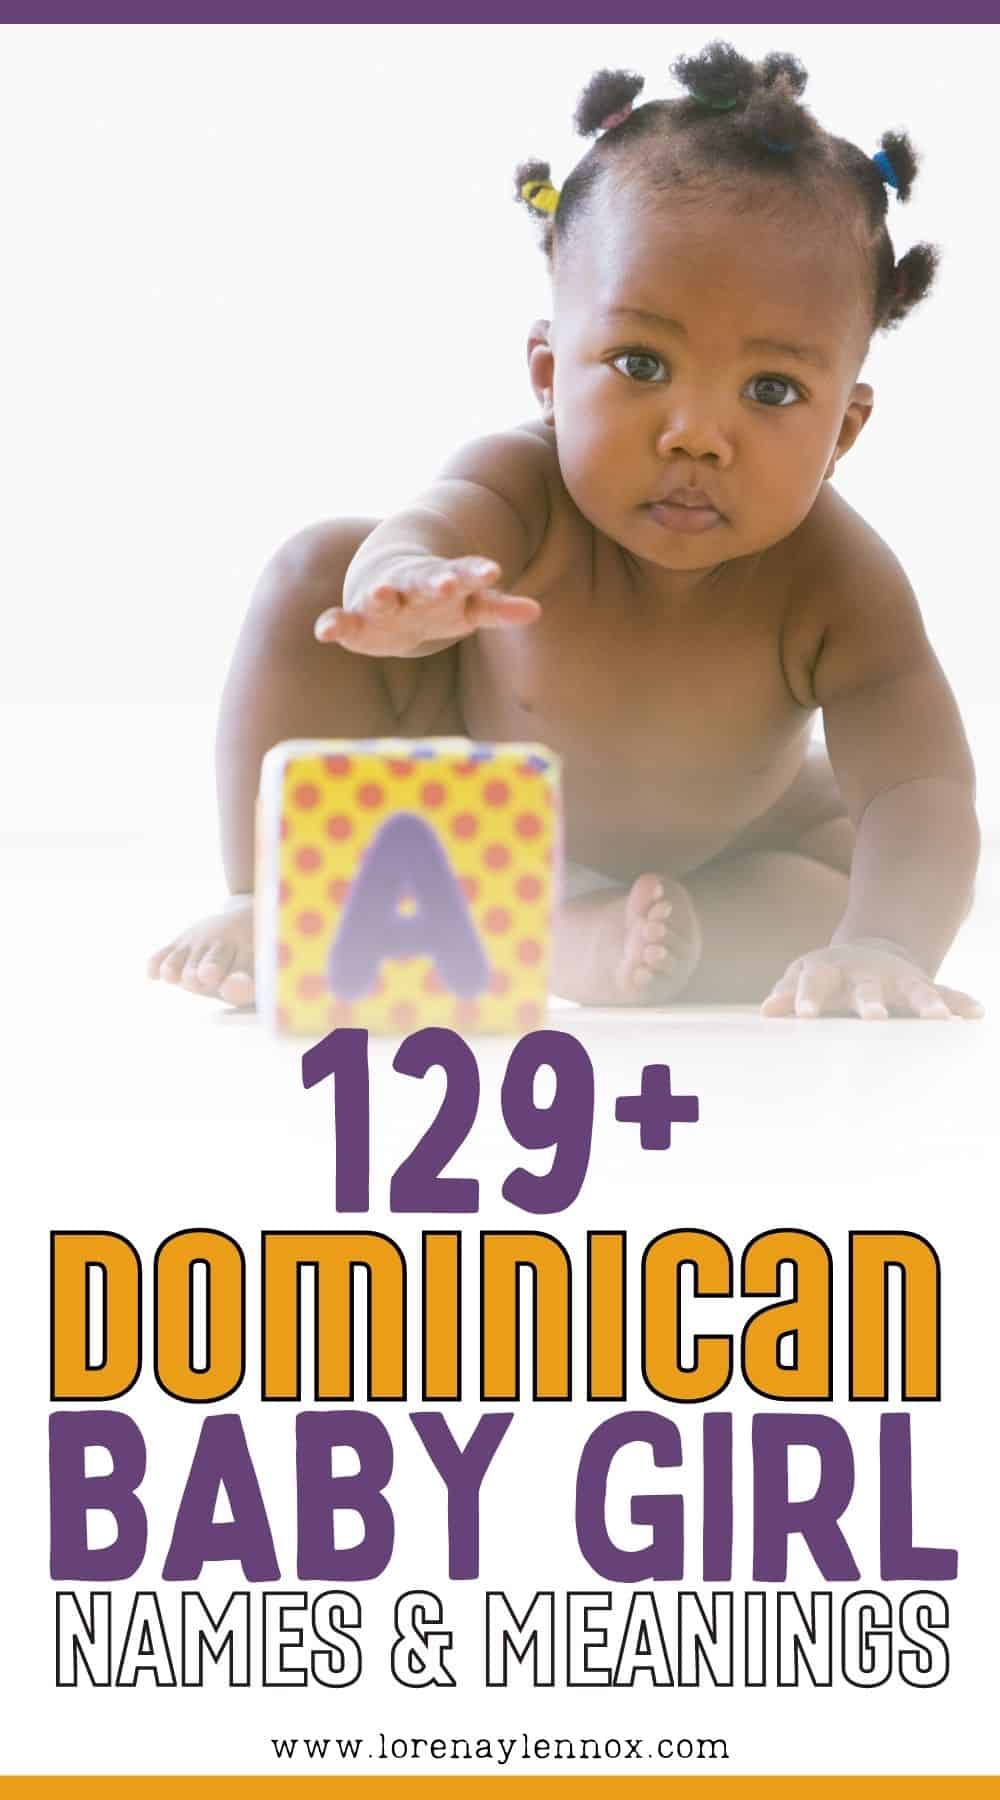 Embrace the sweetness of 129+ cute Dominican baby girl names that celebrate the beauty of Dominican culture and heritage. From classic favorites to charming modern picks, find the perfect name to give your little princess a truly meaningful identity. 🌺👶 #DominicanBabyNames #BabyGirlNames #CuteNames #BabyNames #NamingBaby #NameInspiration #Bebé #NombresDeNiña #DominicanCulture